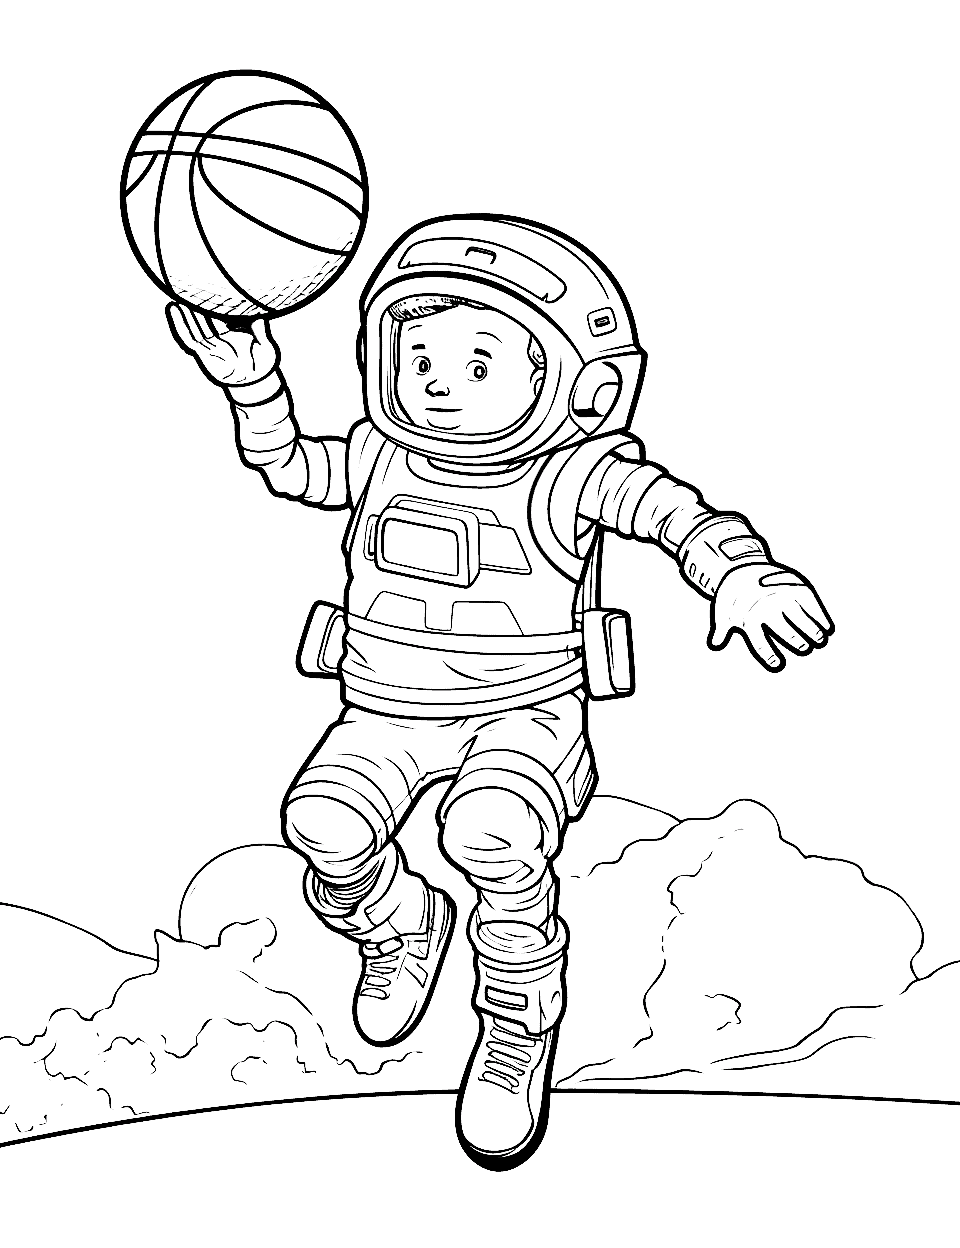 Space Station Zero-G Game Basketball Coloring Page - An astronaut playing basketball in zero gravity on an outer space planet surface.